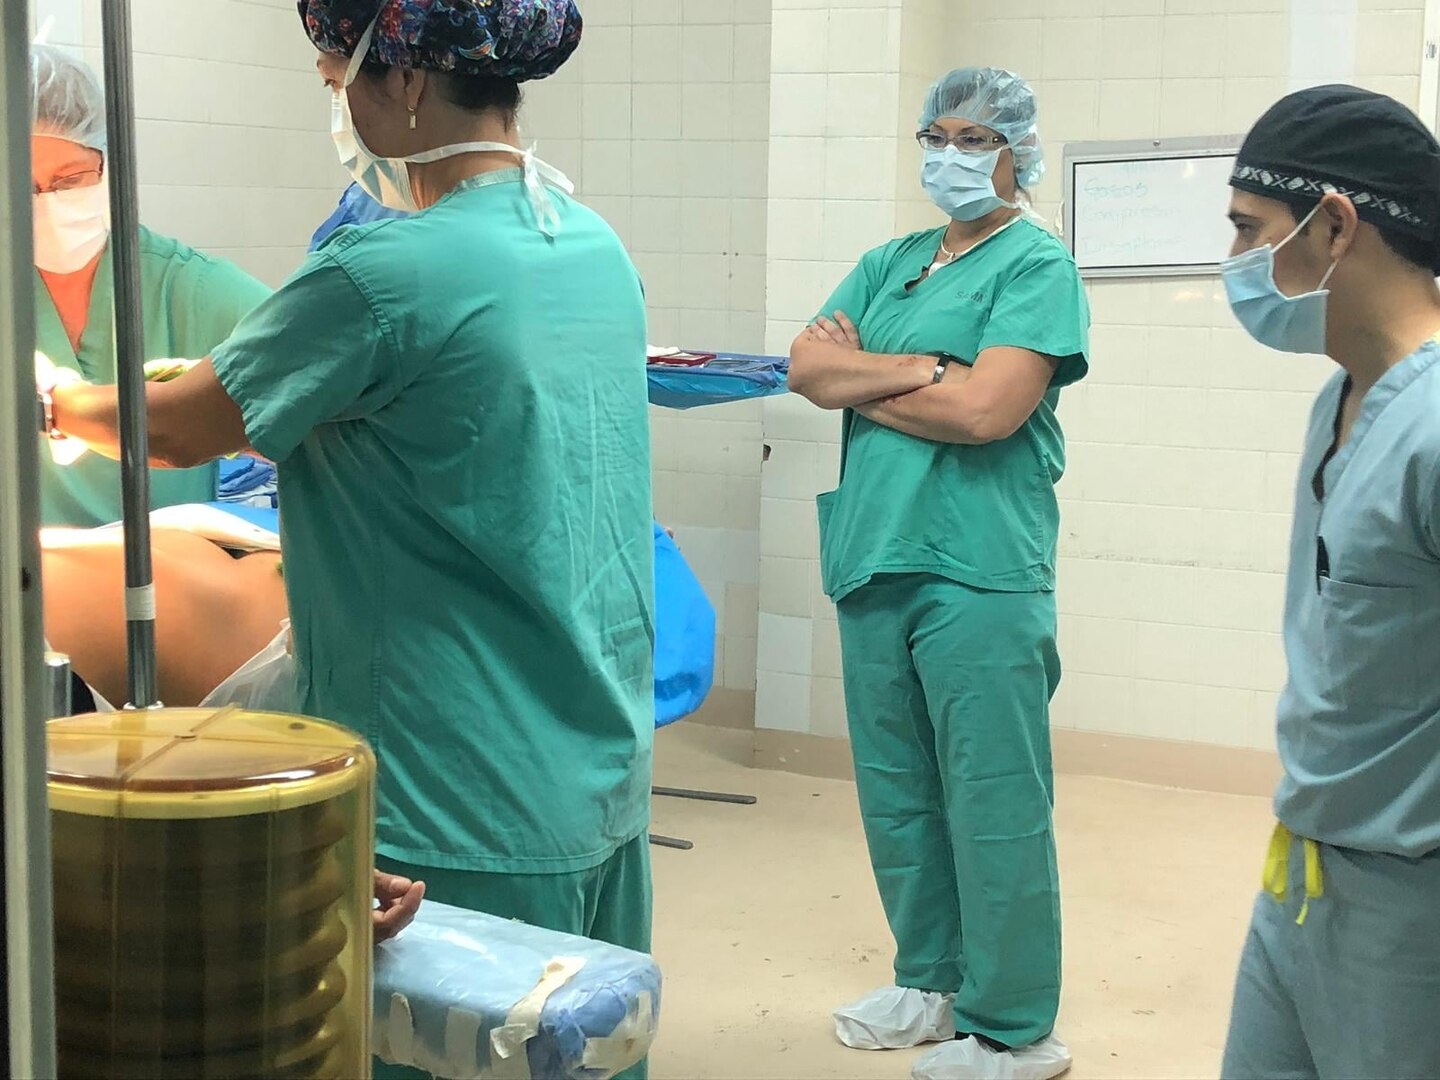 Brig. Gen. Irene Zoppi, director of U.S. Army South Army Reserve Engagement Cell, was invited to witness a full surgical process at Santa Teresa Community Hospital in Comayagua, Honduras, Sept. 24-26. The medical element team conducts surgical readiness training exercises for the local community.